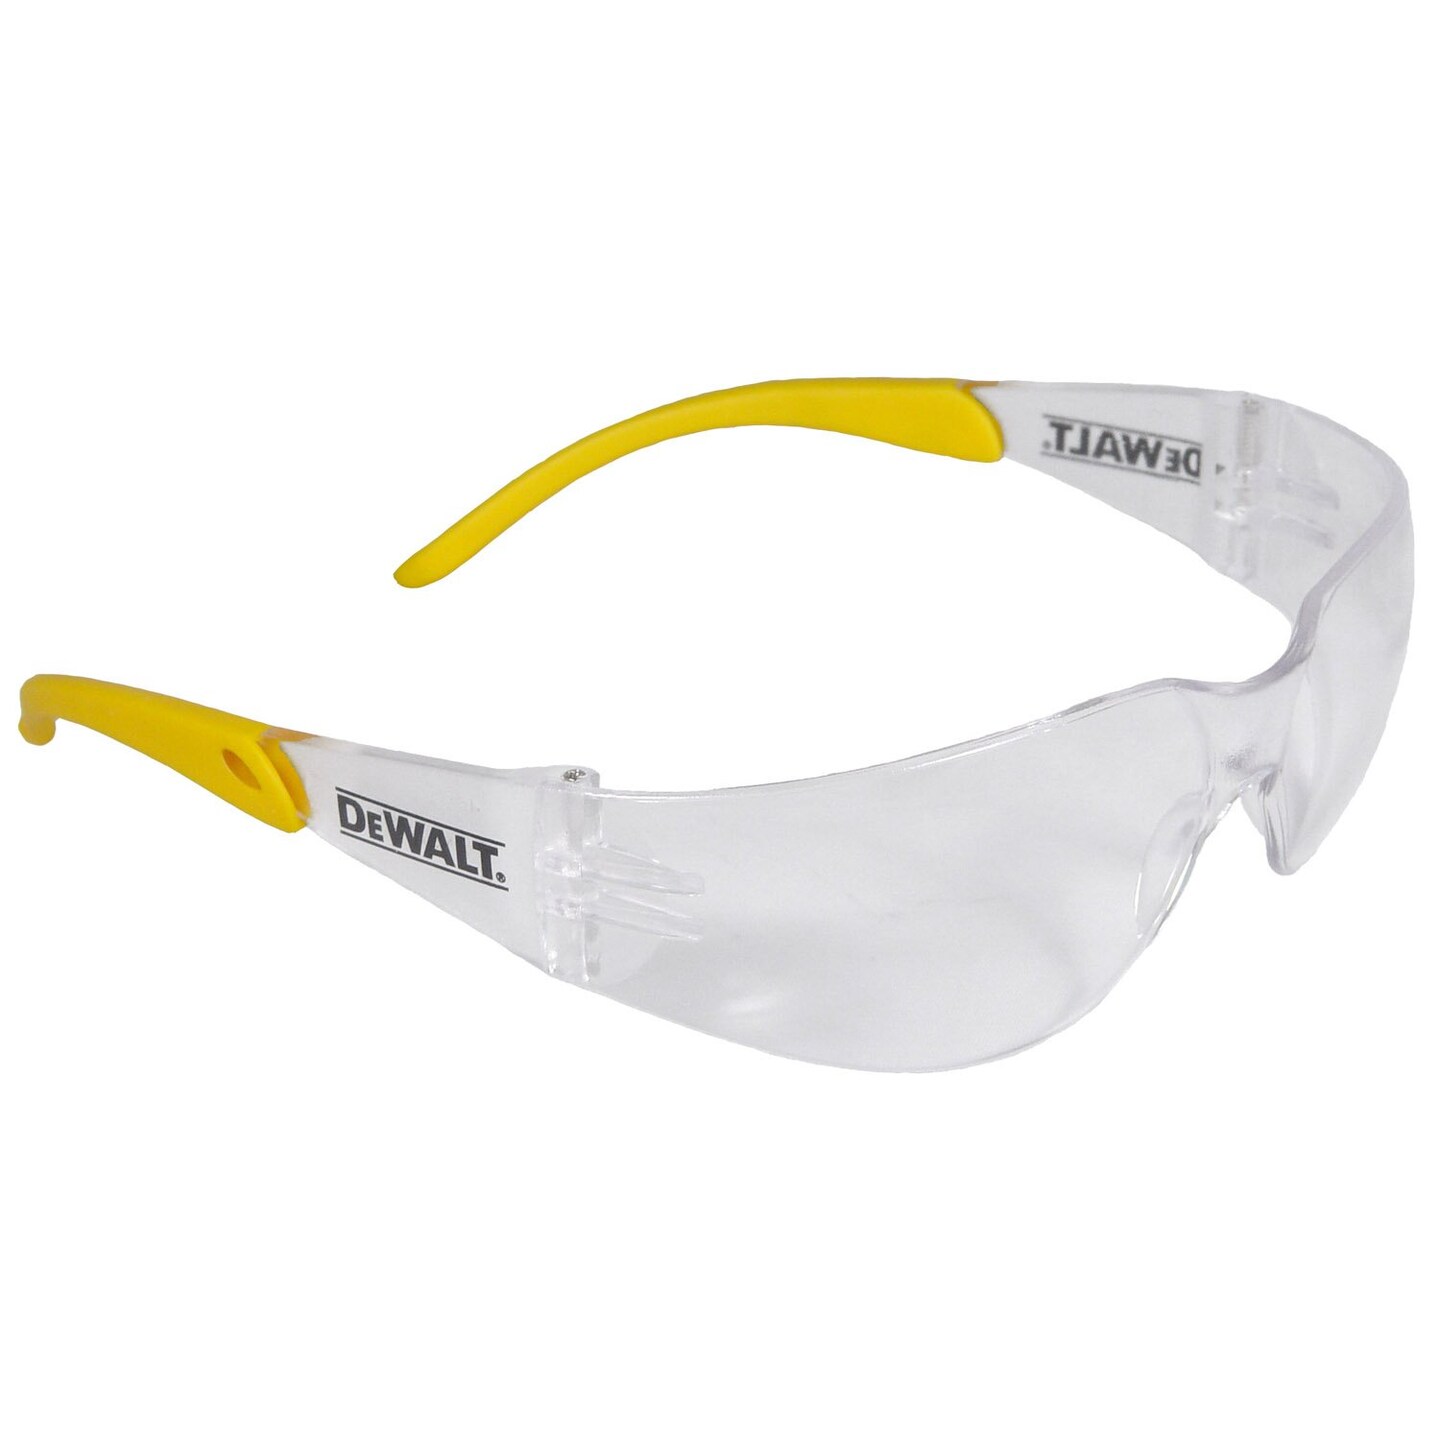 Dewalt DPG54-1C Protector Clear High Performance Lightweight Protective Safety Glasses with Wraparou